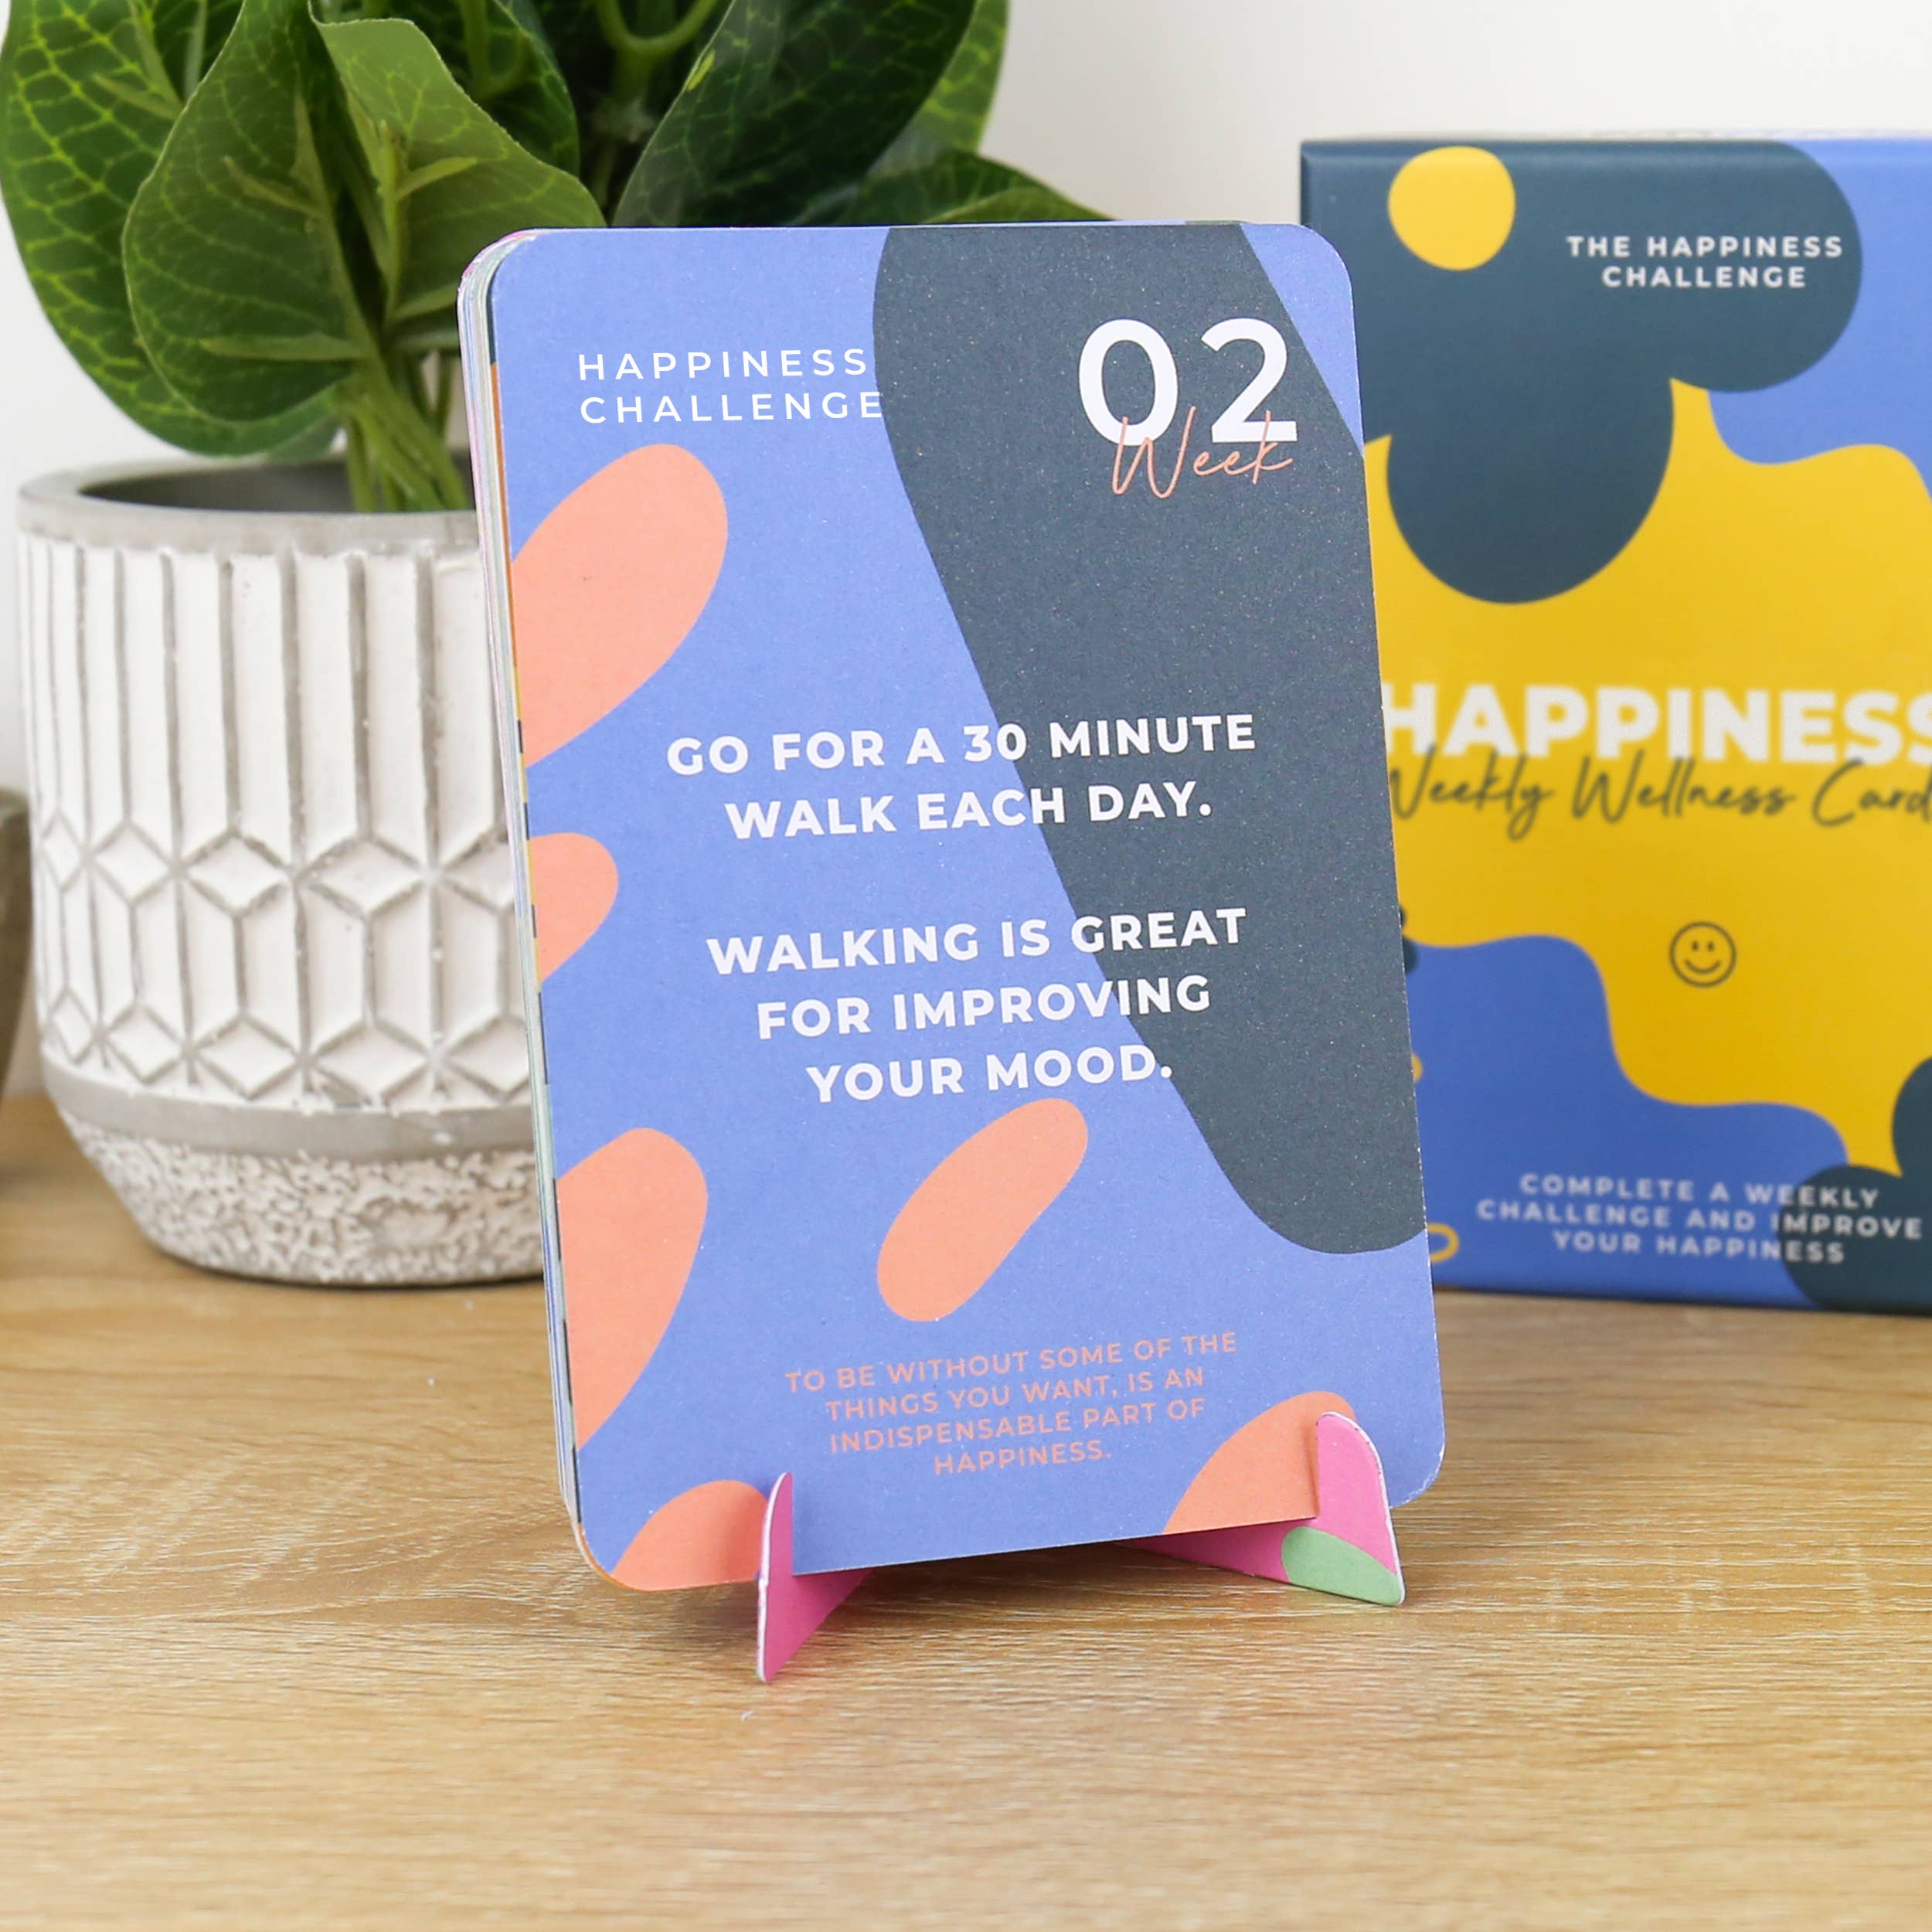 Happiness - Weekly Wellness Cards